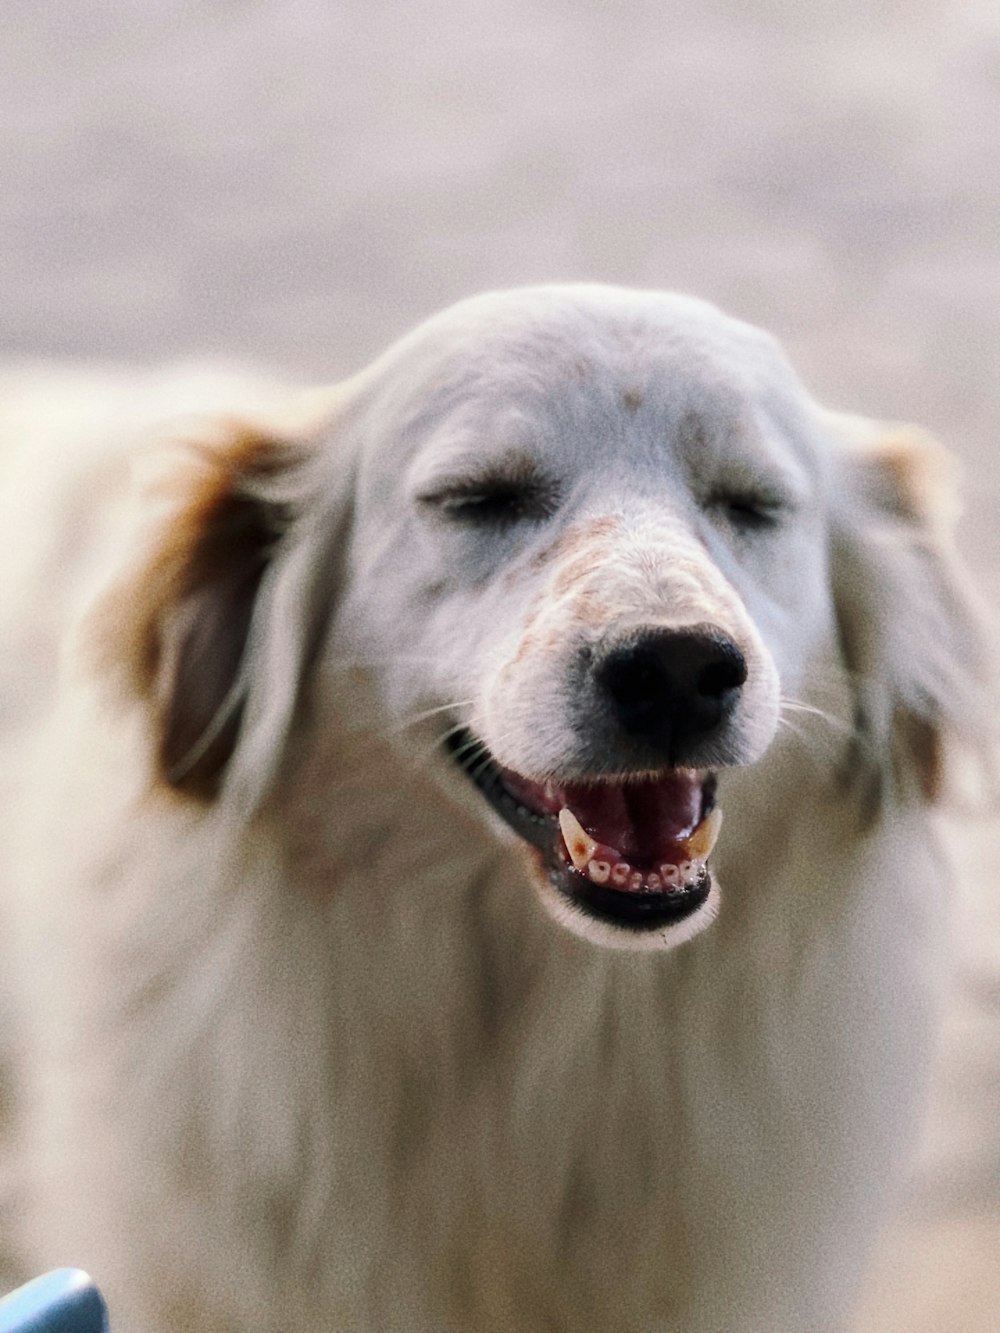 a close up of a dog with its eyes closed